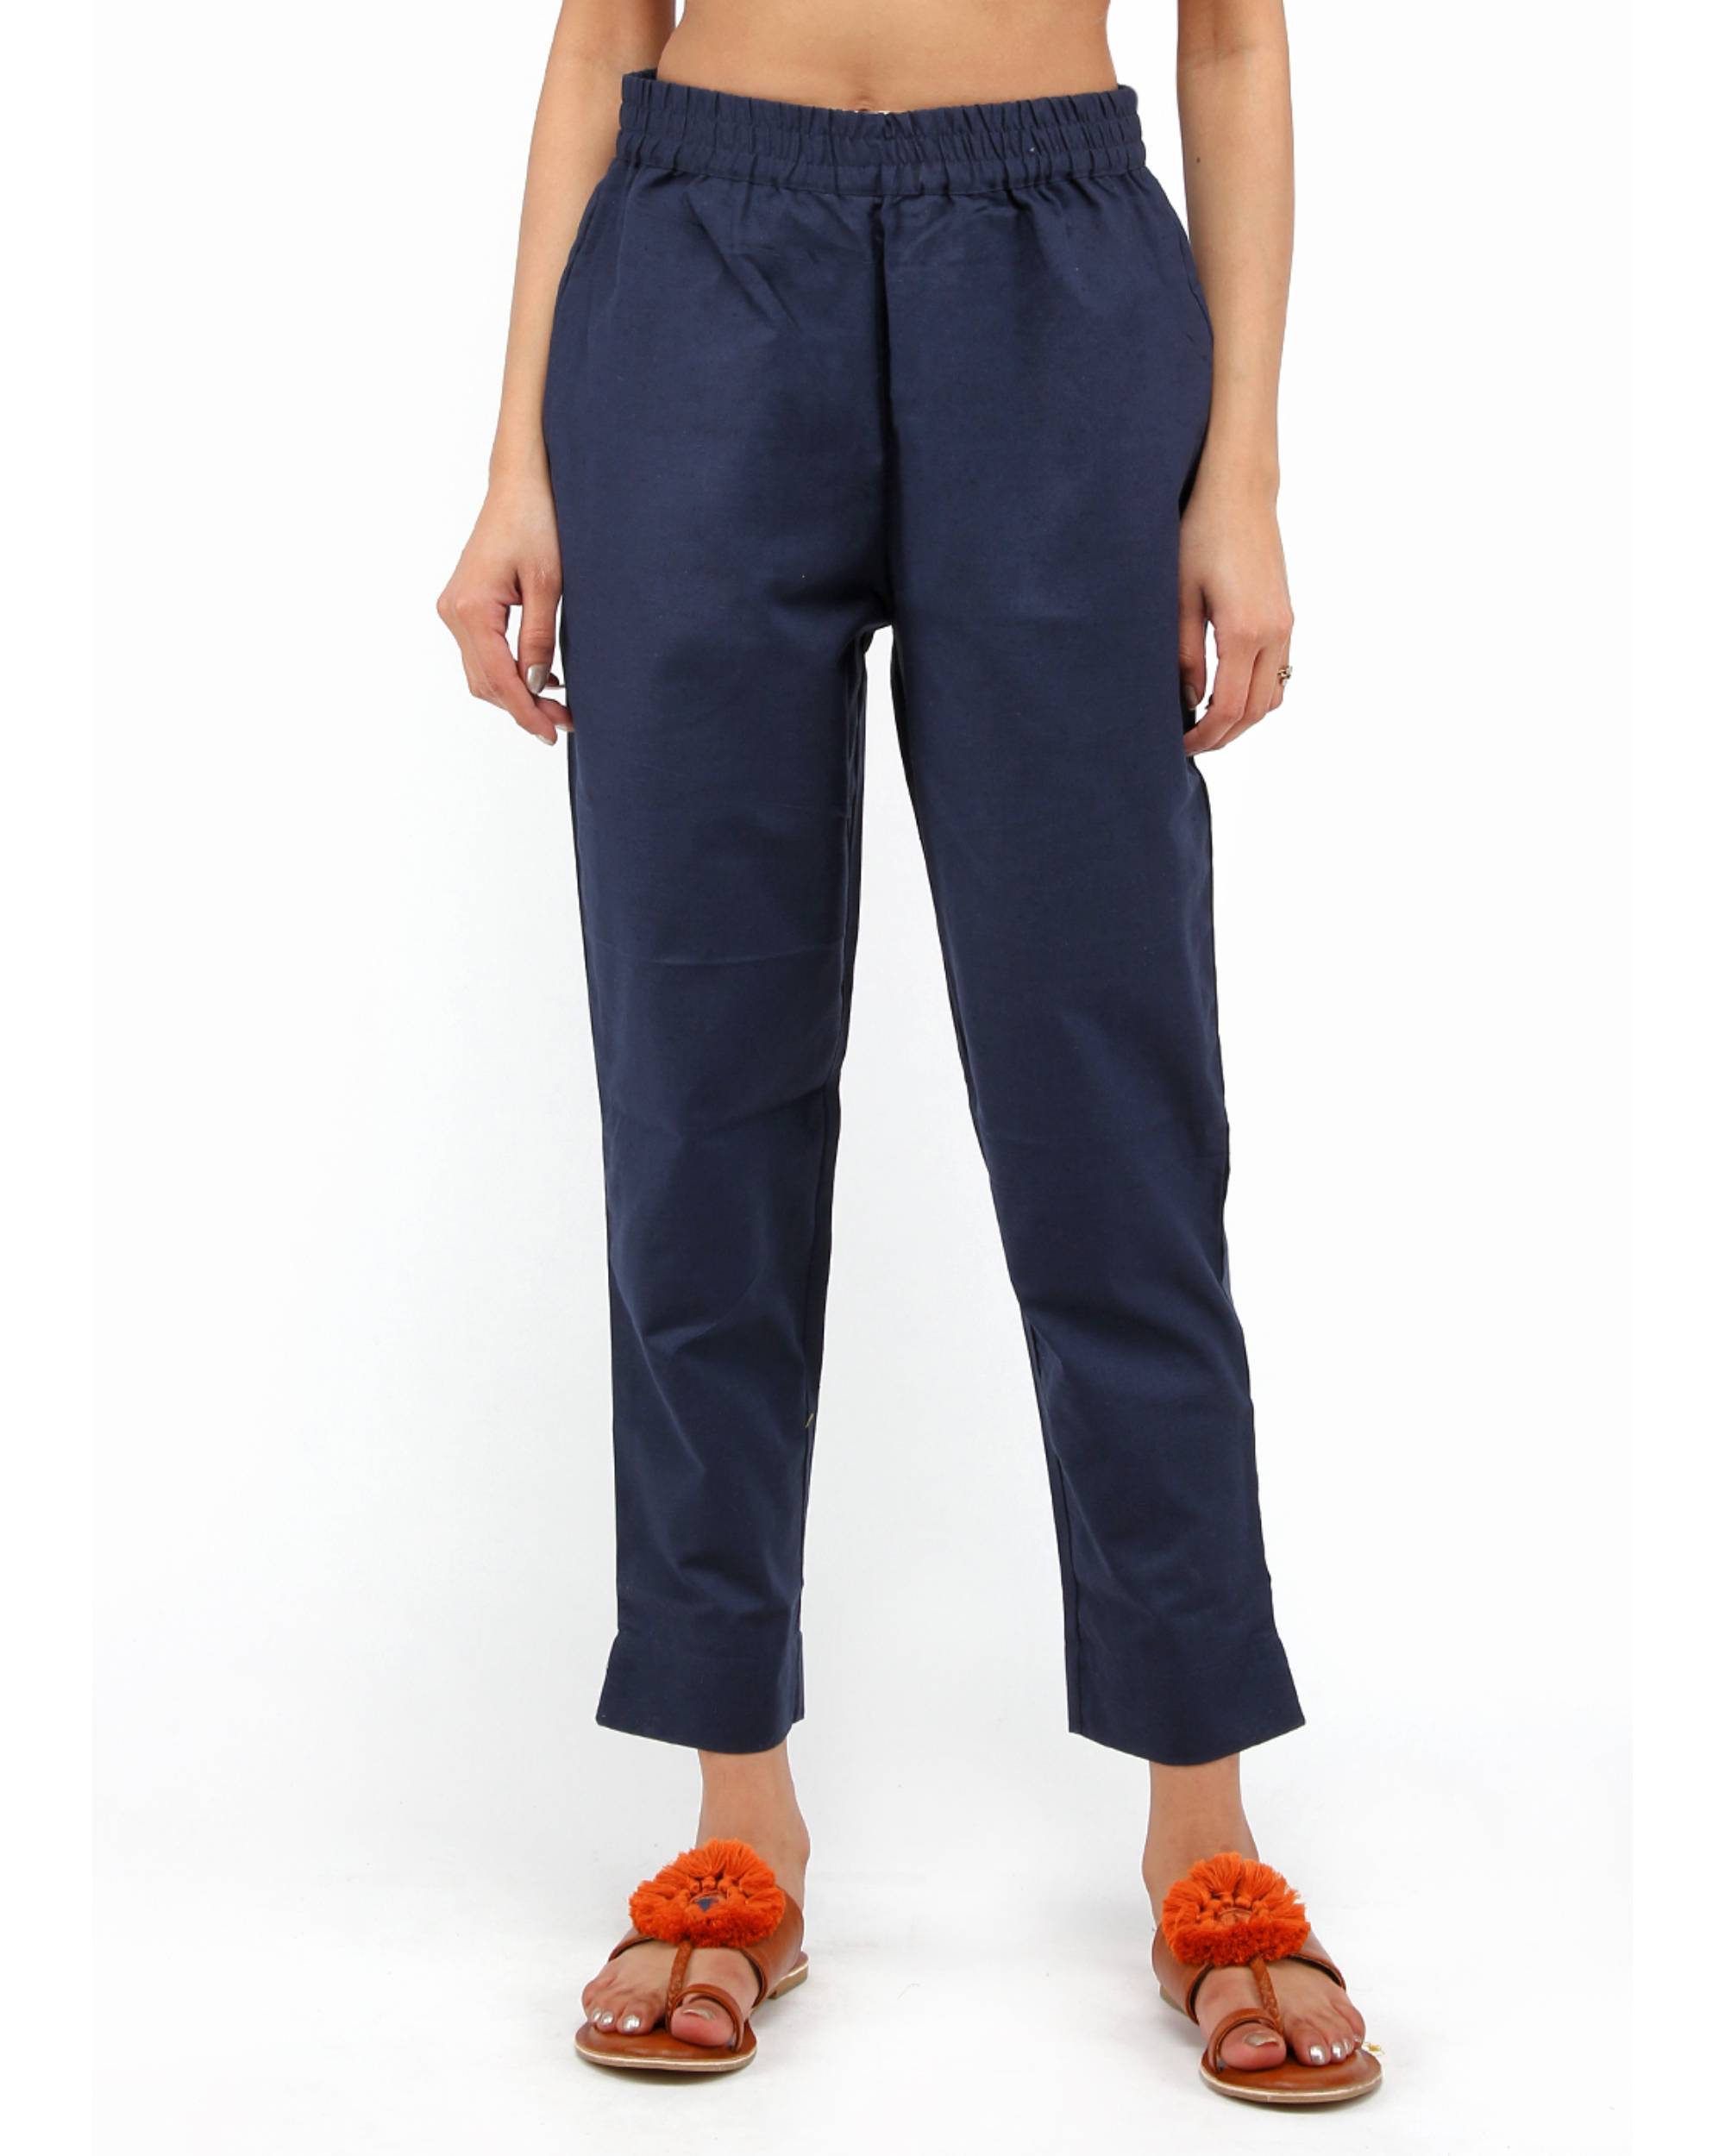 Michael Kors Collection - Navy Blue Stretch Wool Cigarette Pants